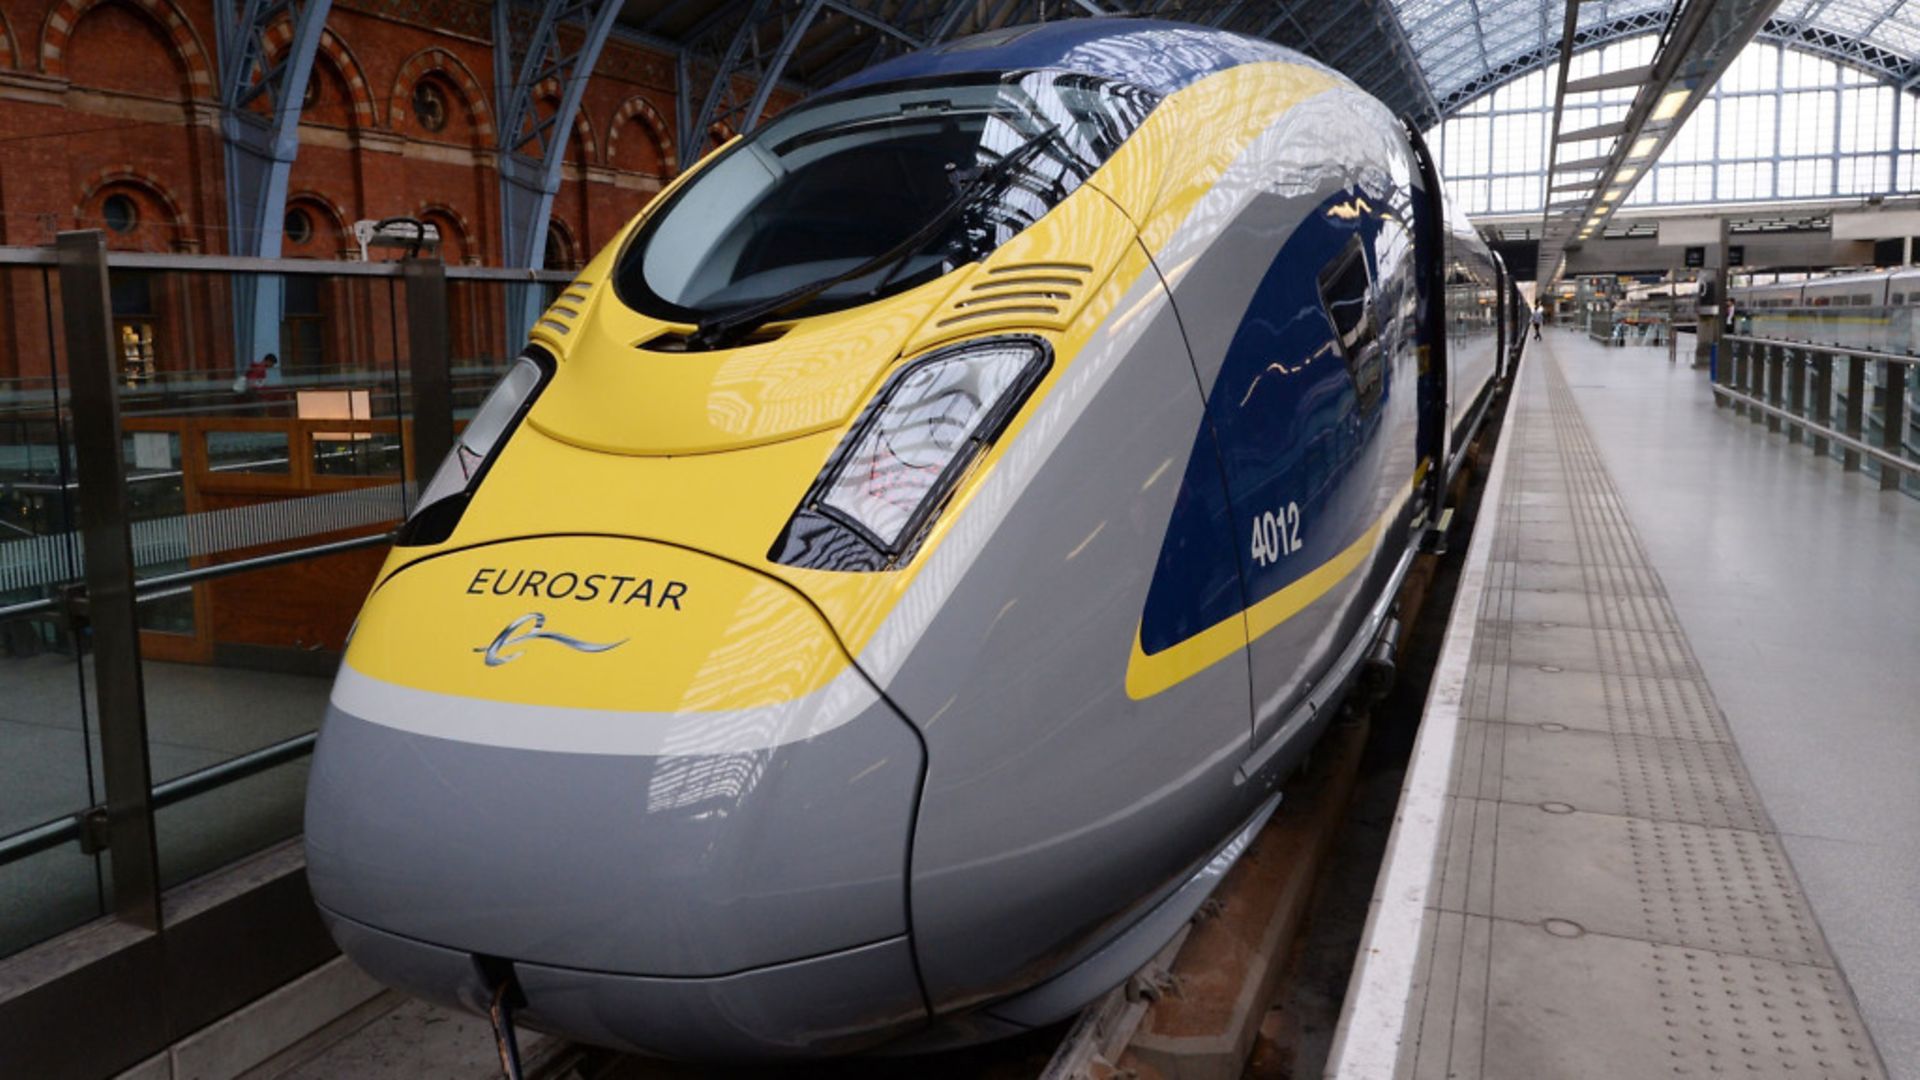 A Trans-Europe Express as part of Eurostar - Credit: PA Wire/PA Images